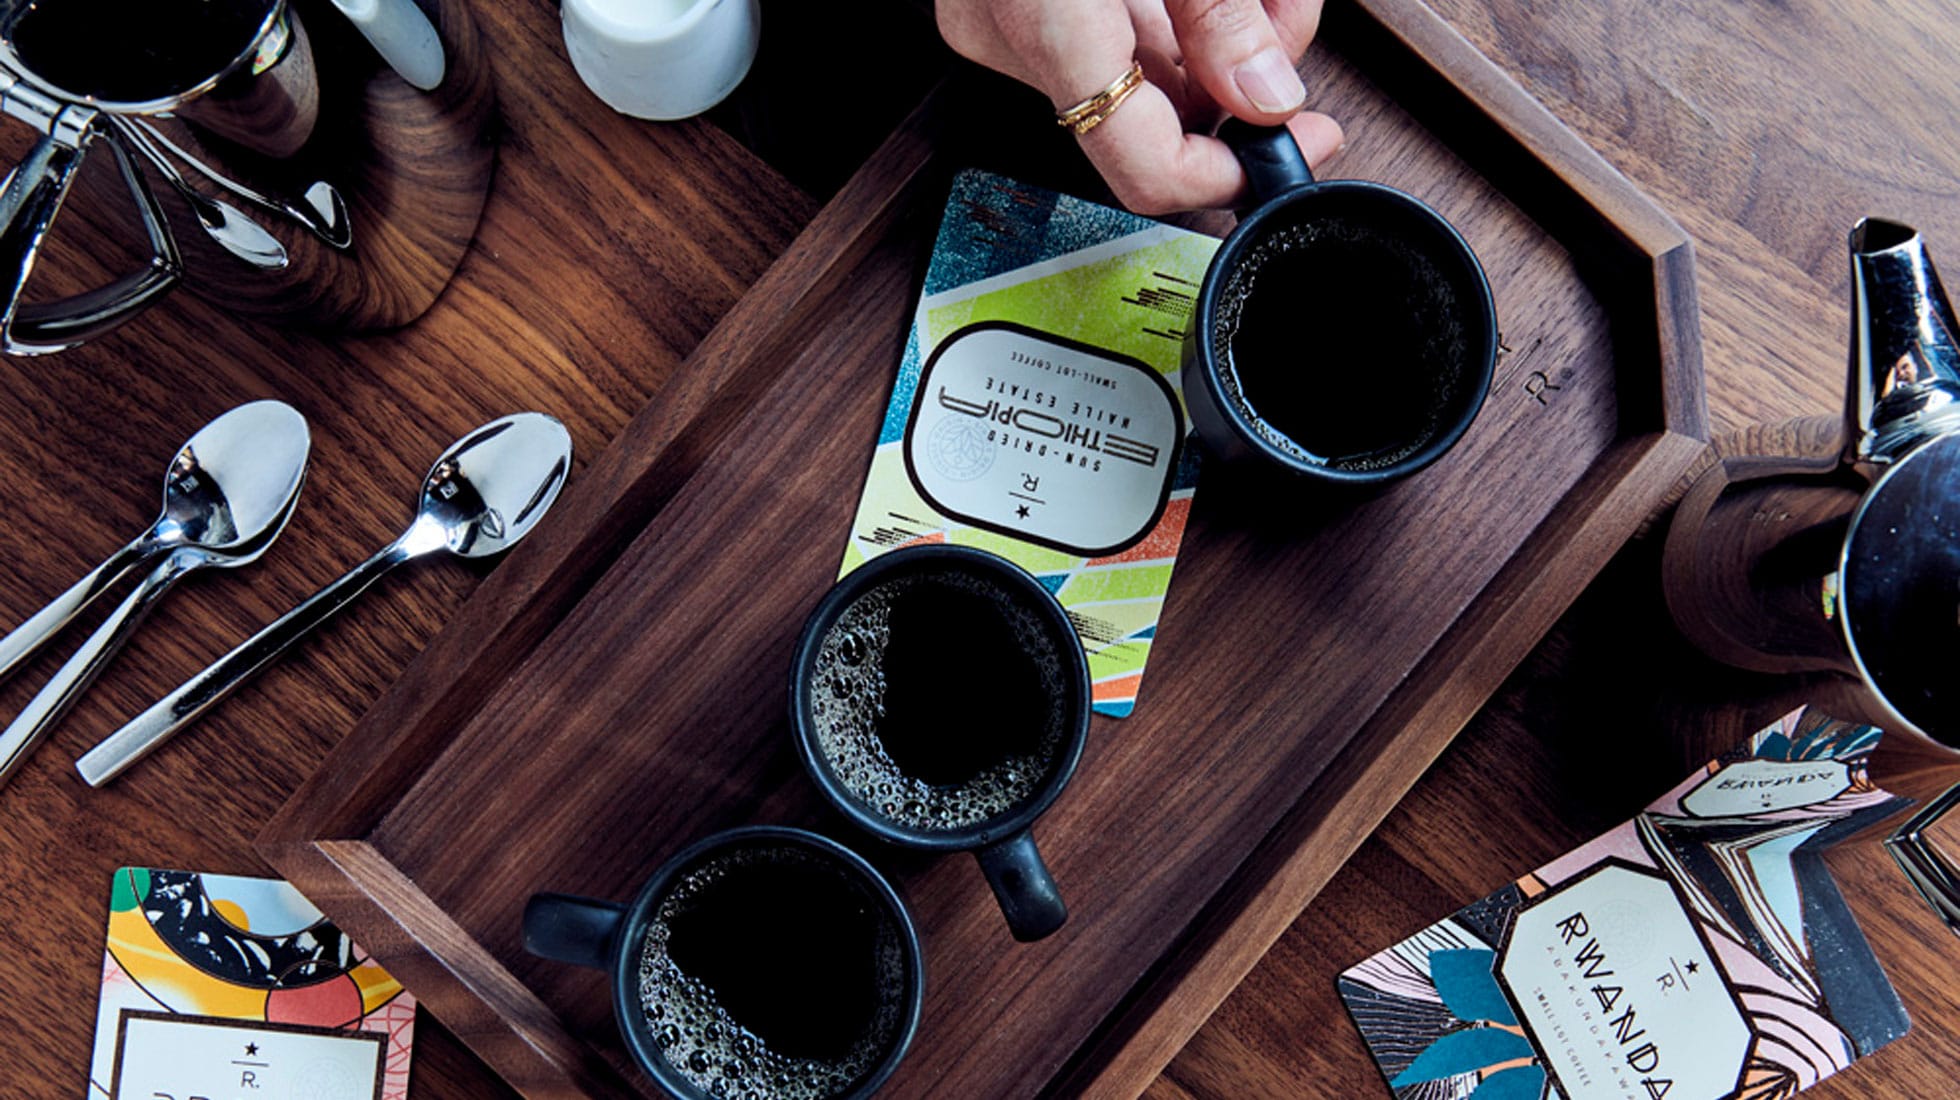 Overhead shot of multiple cups of coffee on a tray with coffee cards, as well as spoons and pots